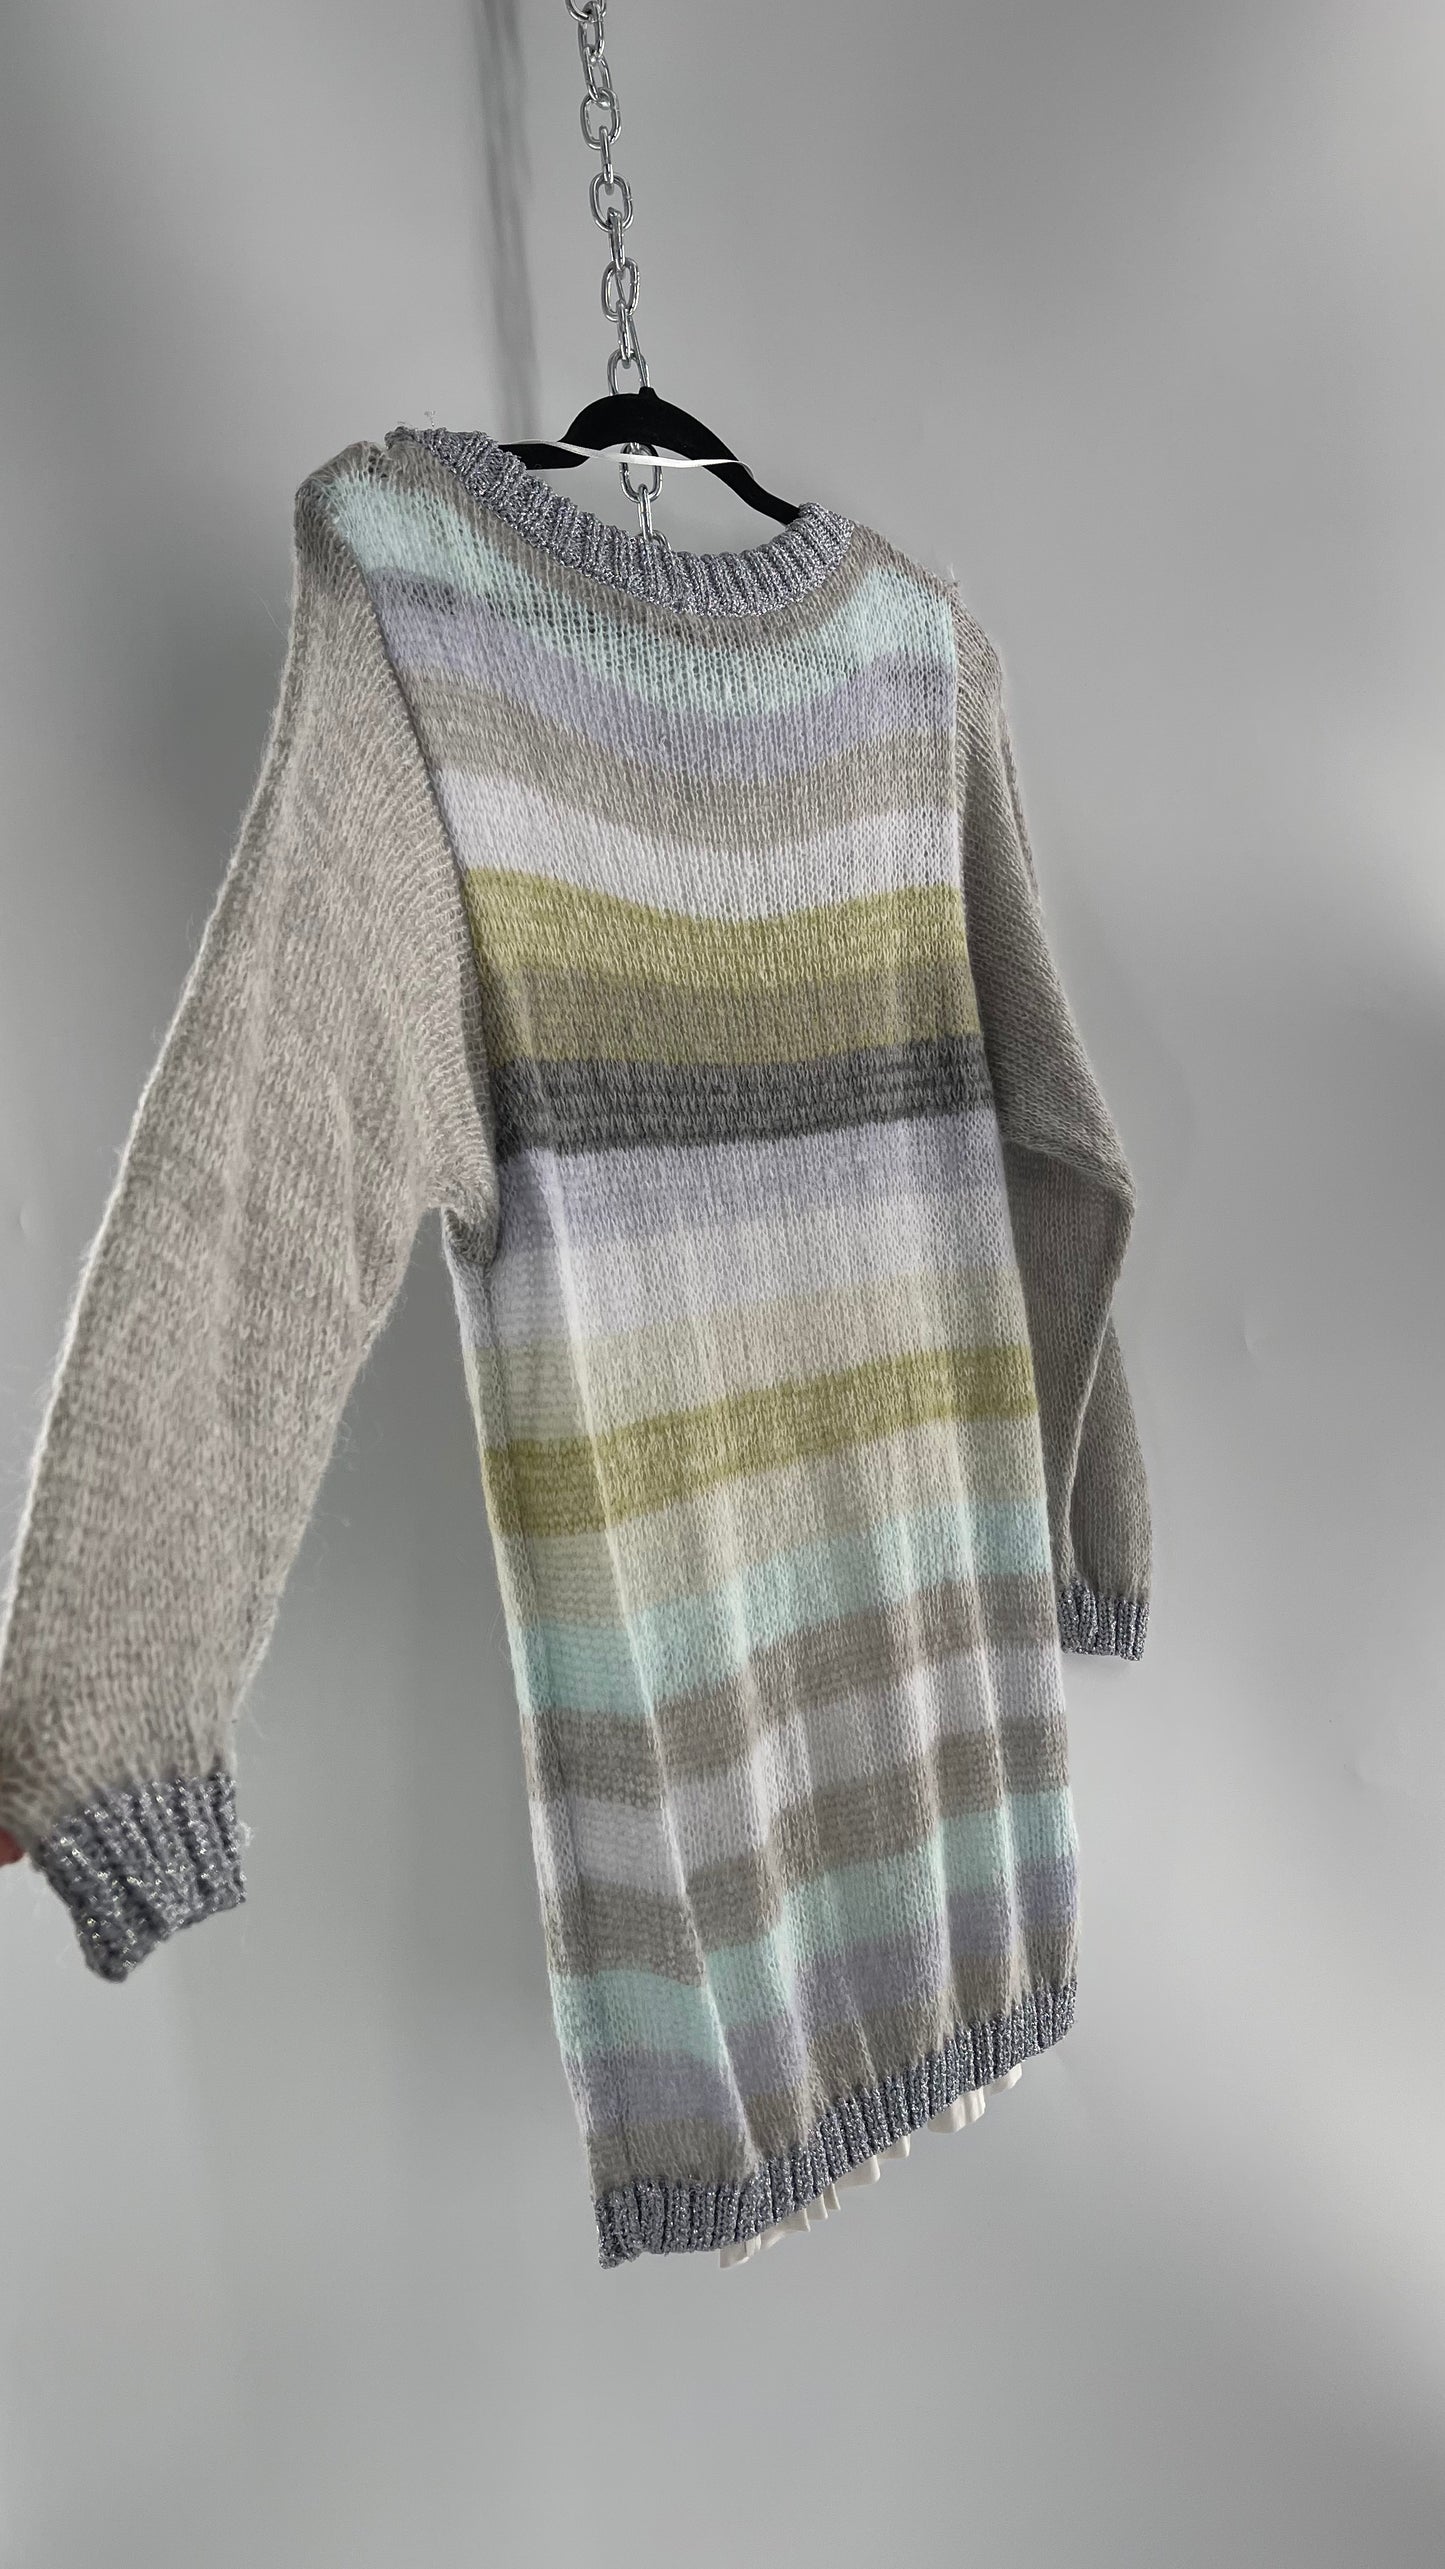 Free People Striped Sweater with Glitter Knit Cuffs and Collar (XS)